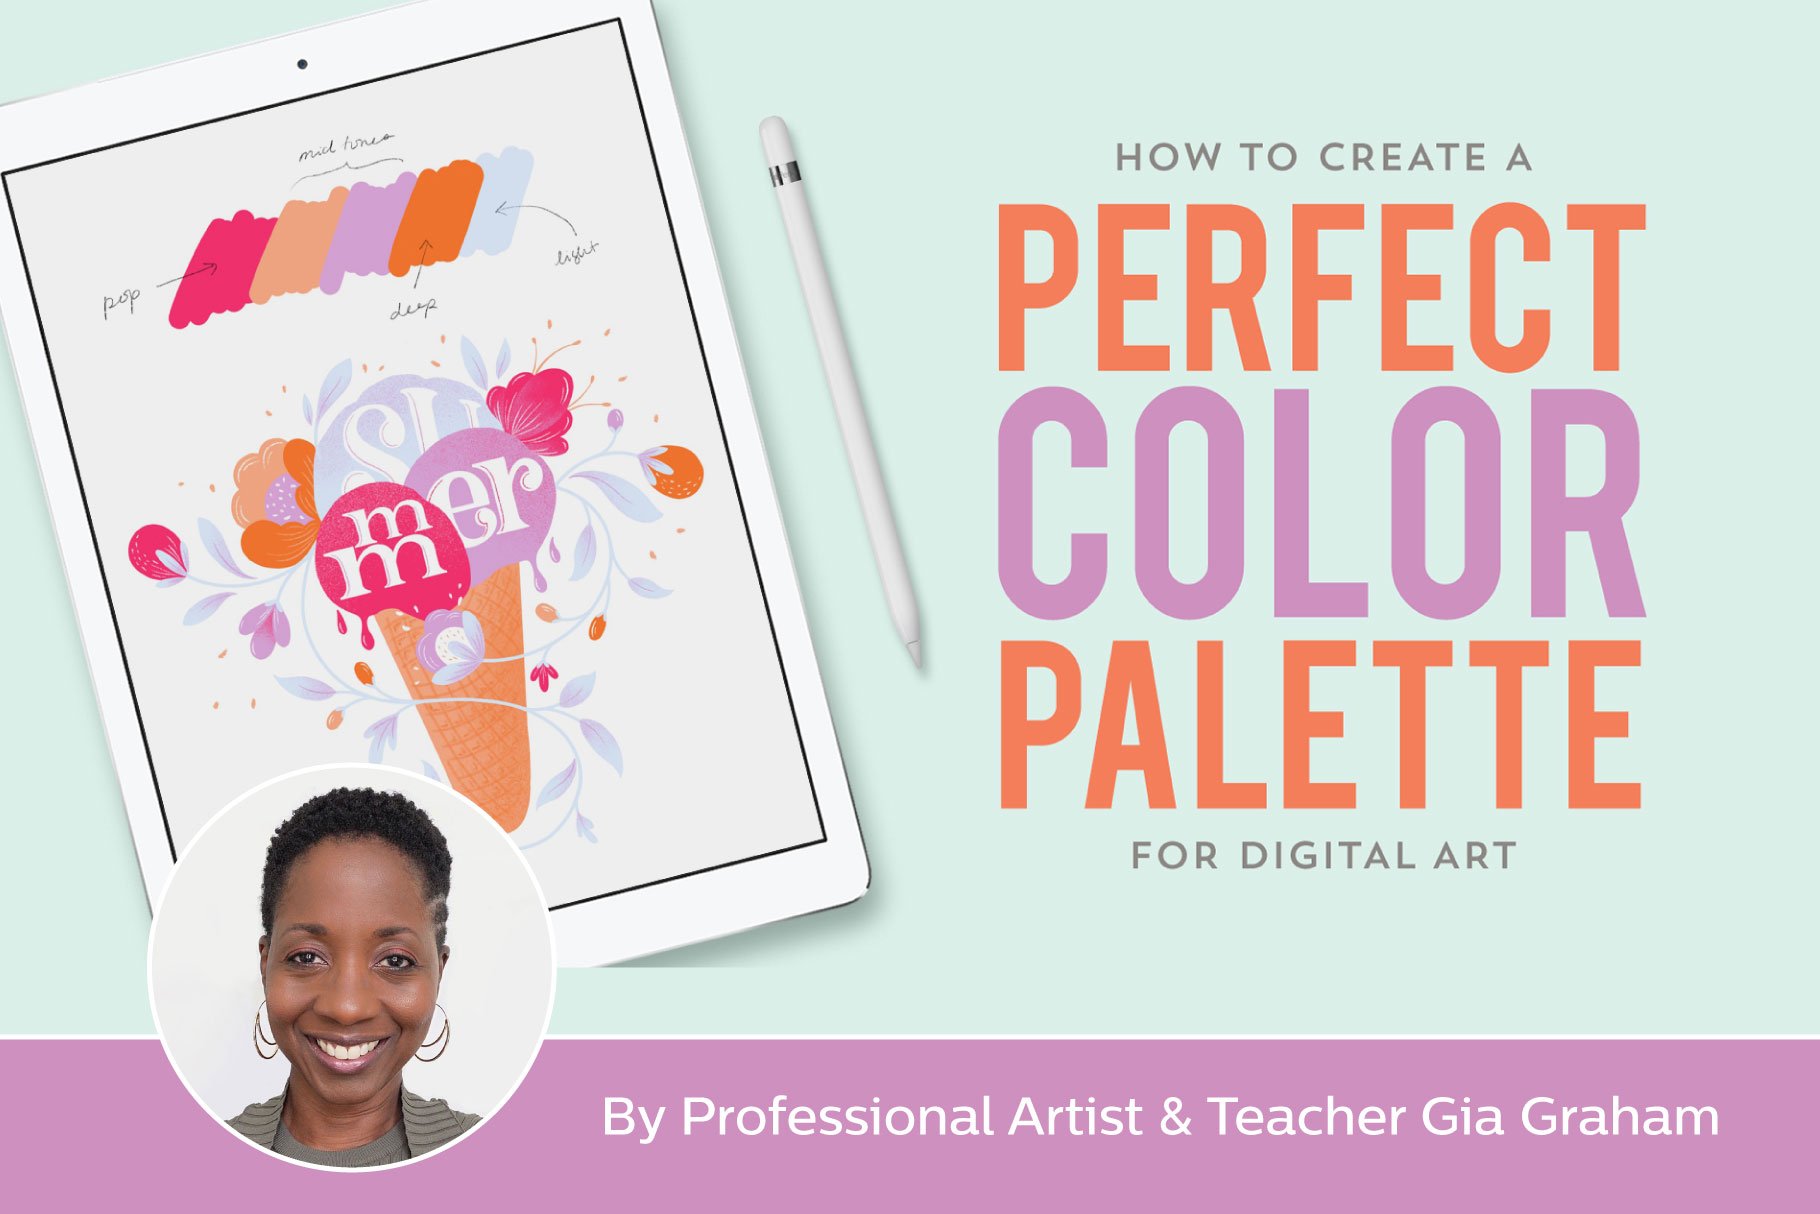 How To Create A Perfect Color Palette For Digital Art